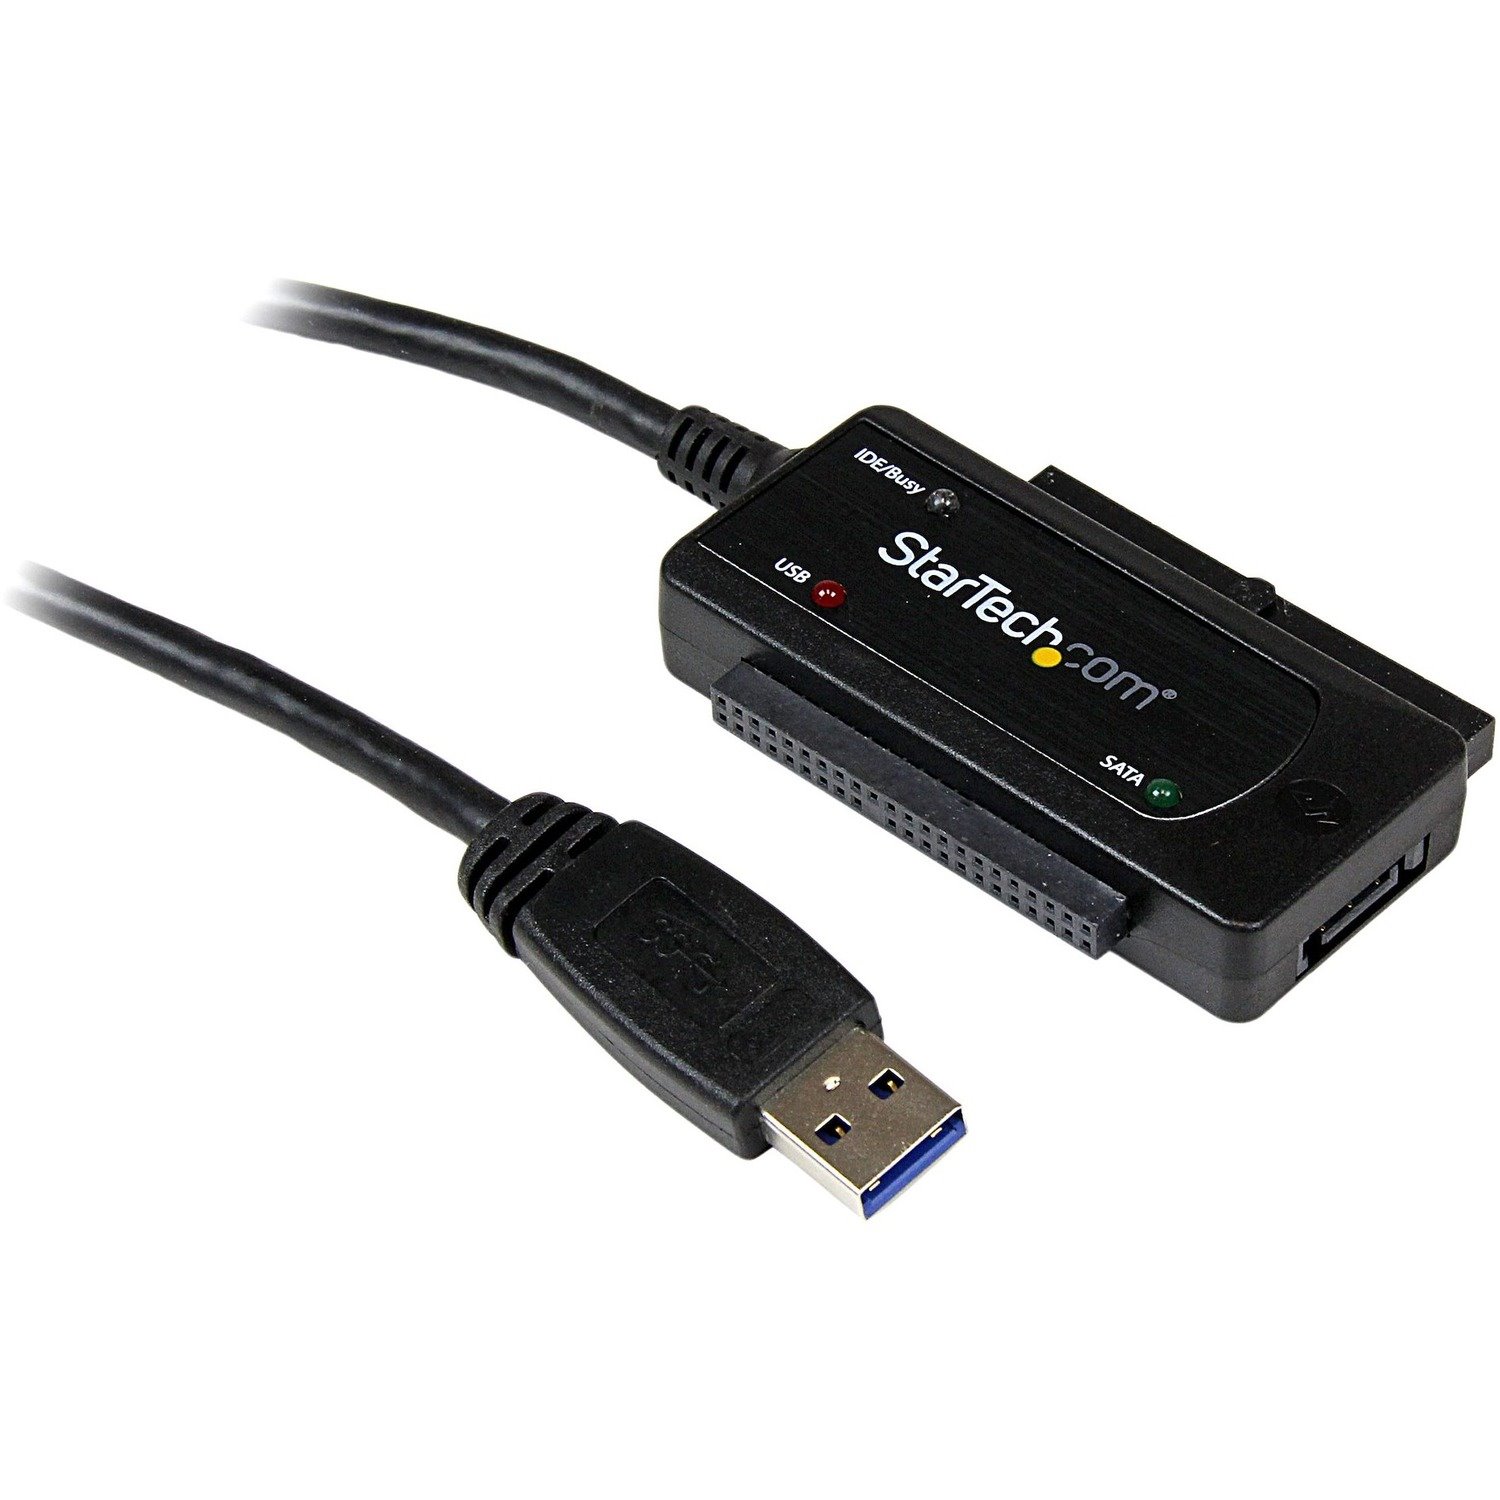 StarTech.com USB 3.0 to SATA IDE Adapter - 2.5in / 3.5in - External Hard Drive to USB Converter &acirc;&euro;" Hard Drive Transfer Cable (USB3SSATAIDE)